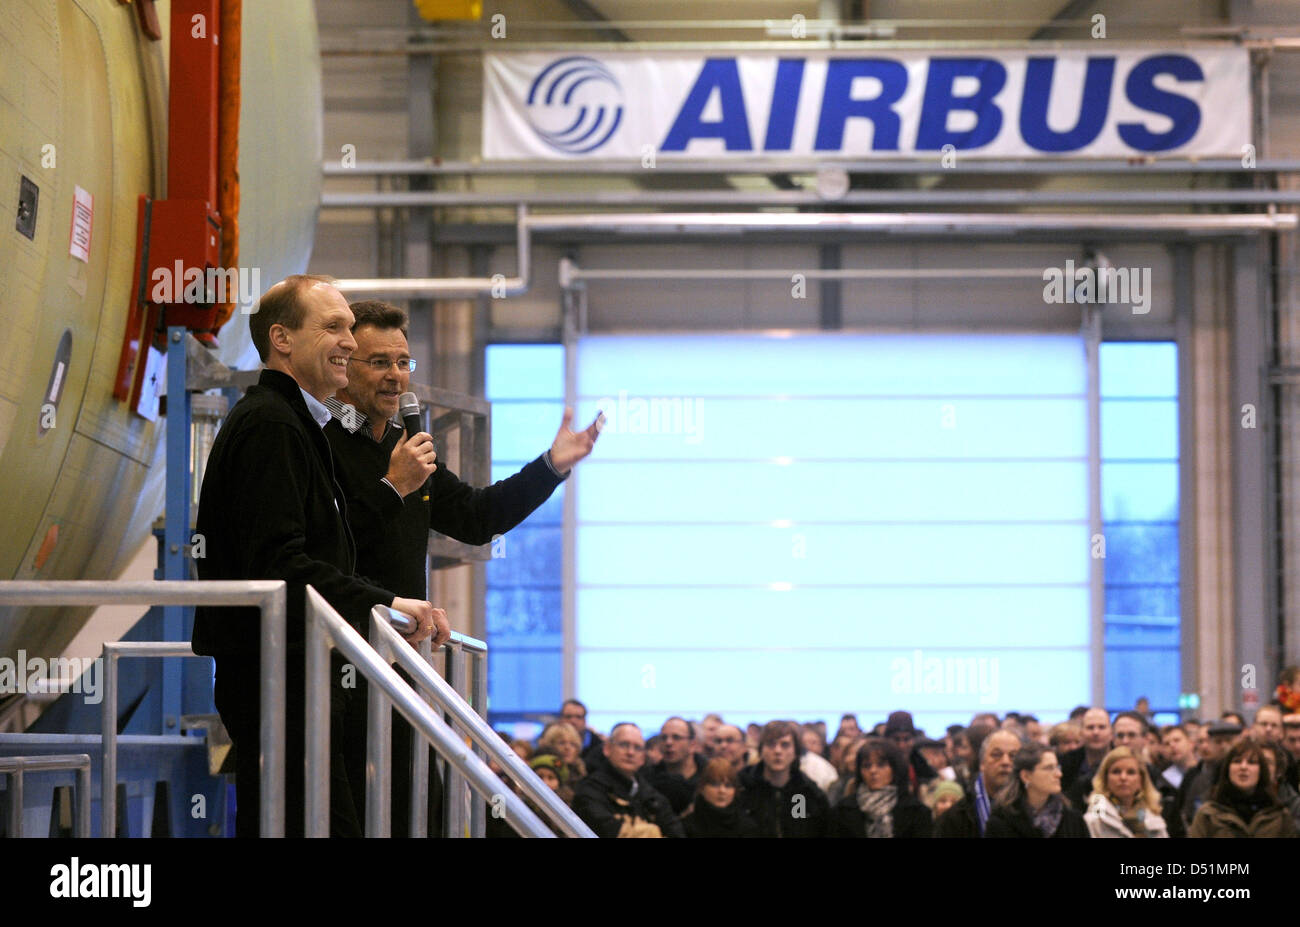 Employees of Airbus say goodbye to the completed fuselage for the fifth prototype of the Airbus A400M with director Kai Brueggemann (L) and head of fuselages Mario Heinen during a celebration at the plant in Bremen, Germany, 29 December 2010. With the fifth prototype, the development of the military plane is completed. Photo: Ingo Wagner Stock Photo